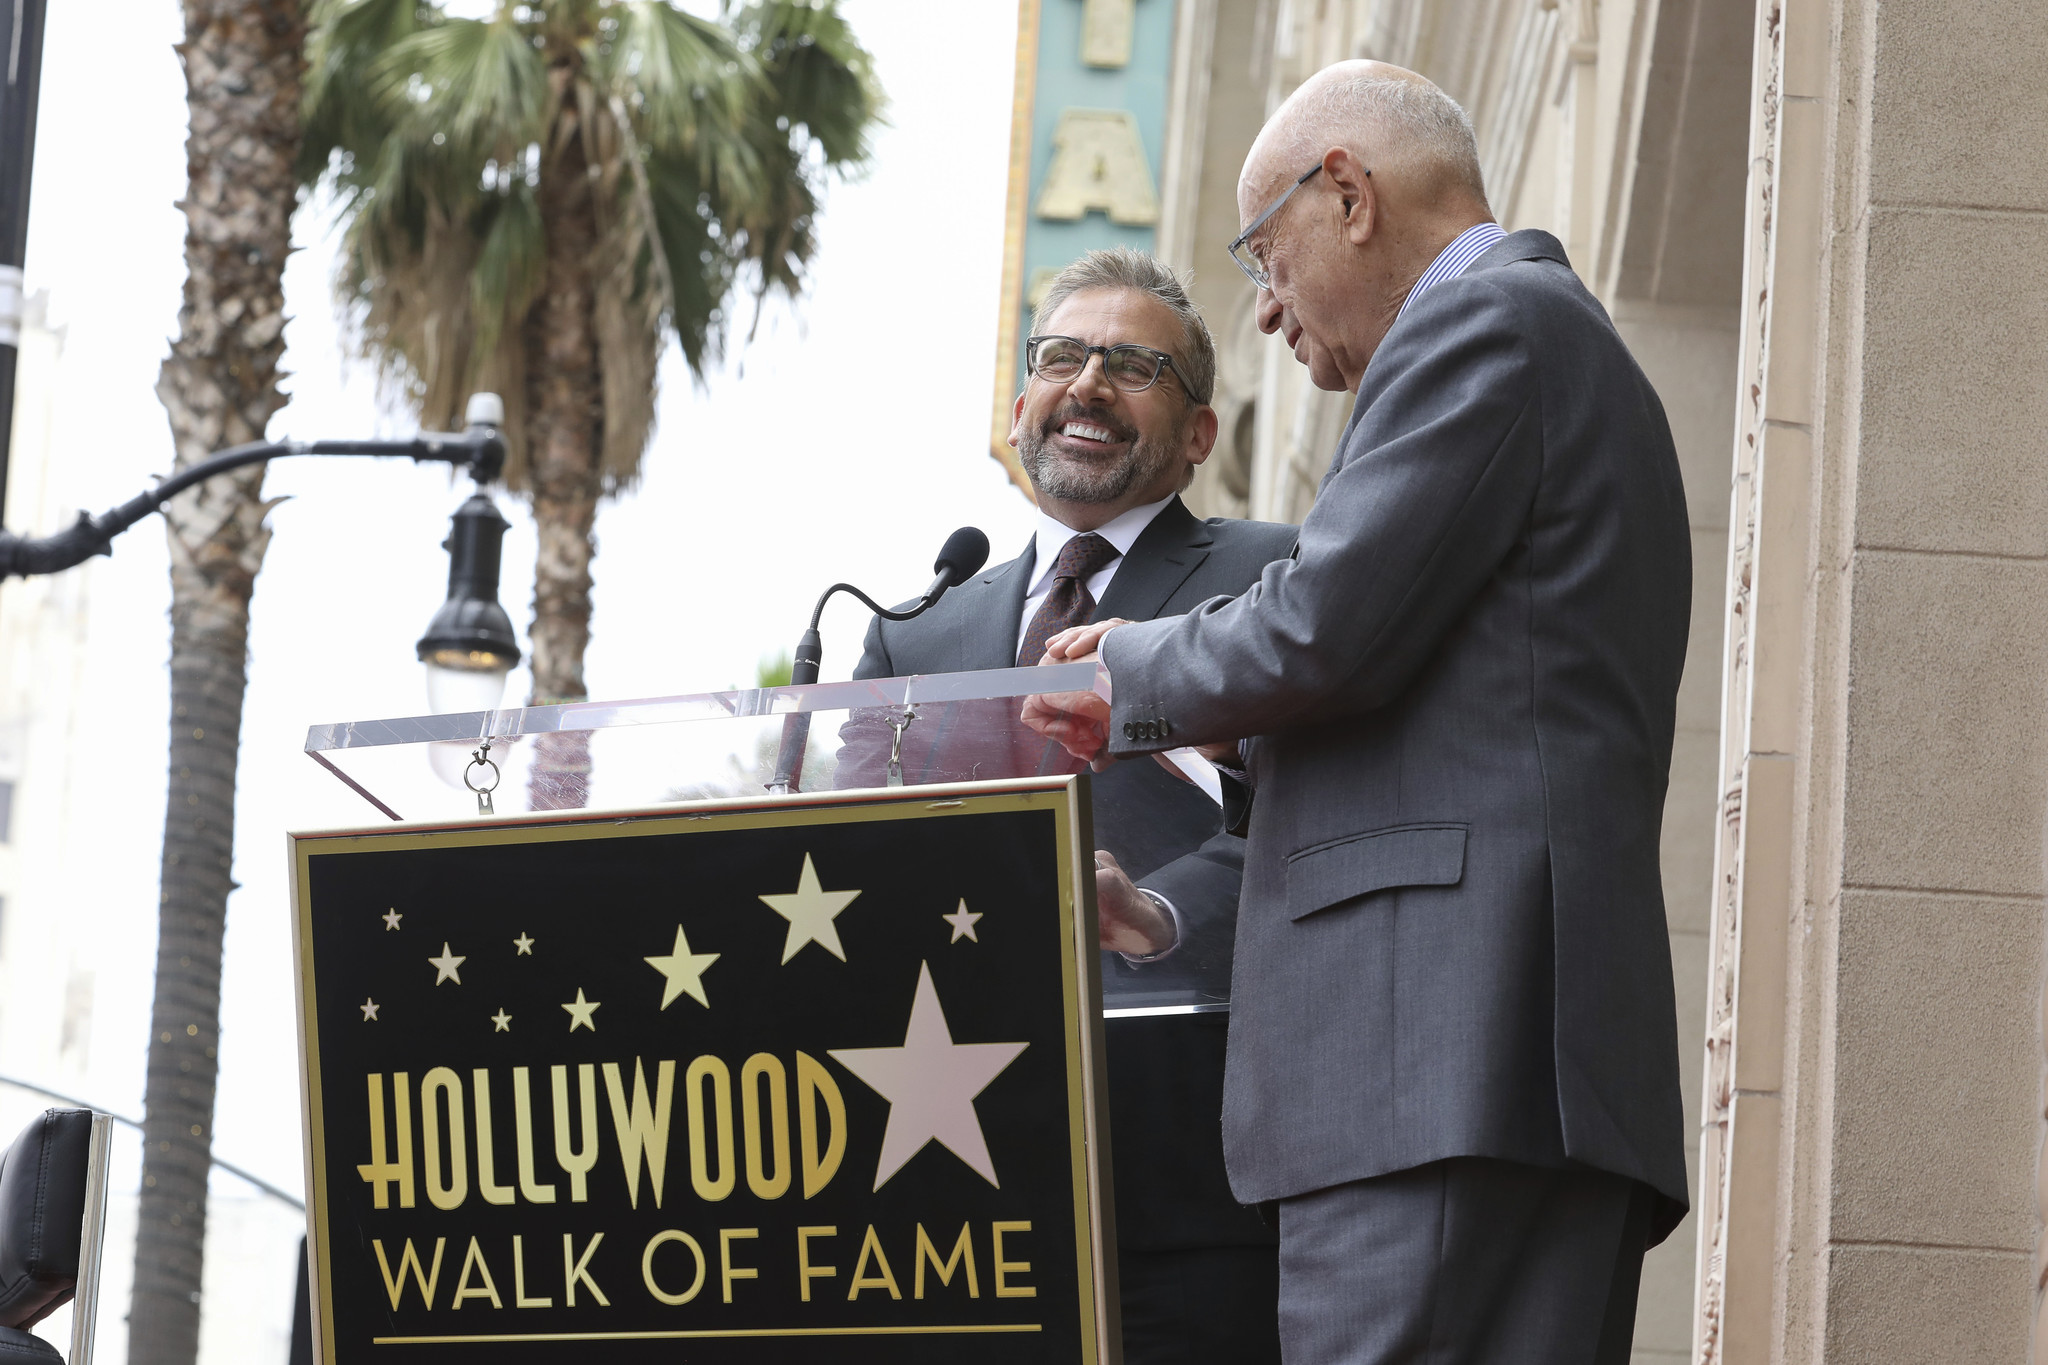 Steve Carell laughs as he give his speech in honor of Alan Arkin's Walk of Fame ceremony on June 7, 2019 in Hollywood, Calif.